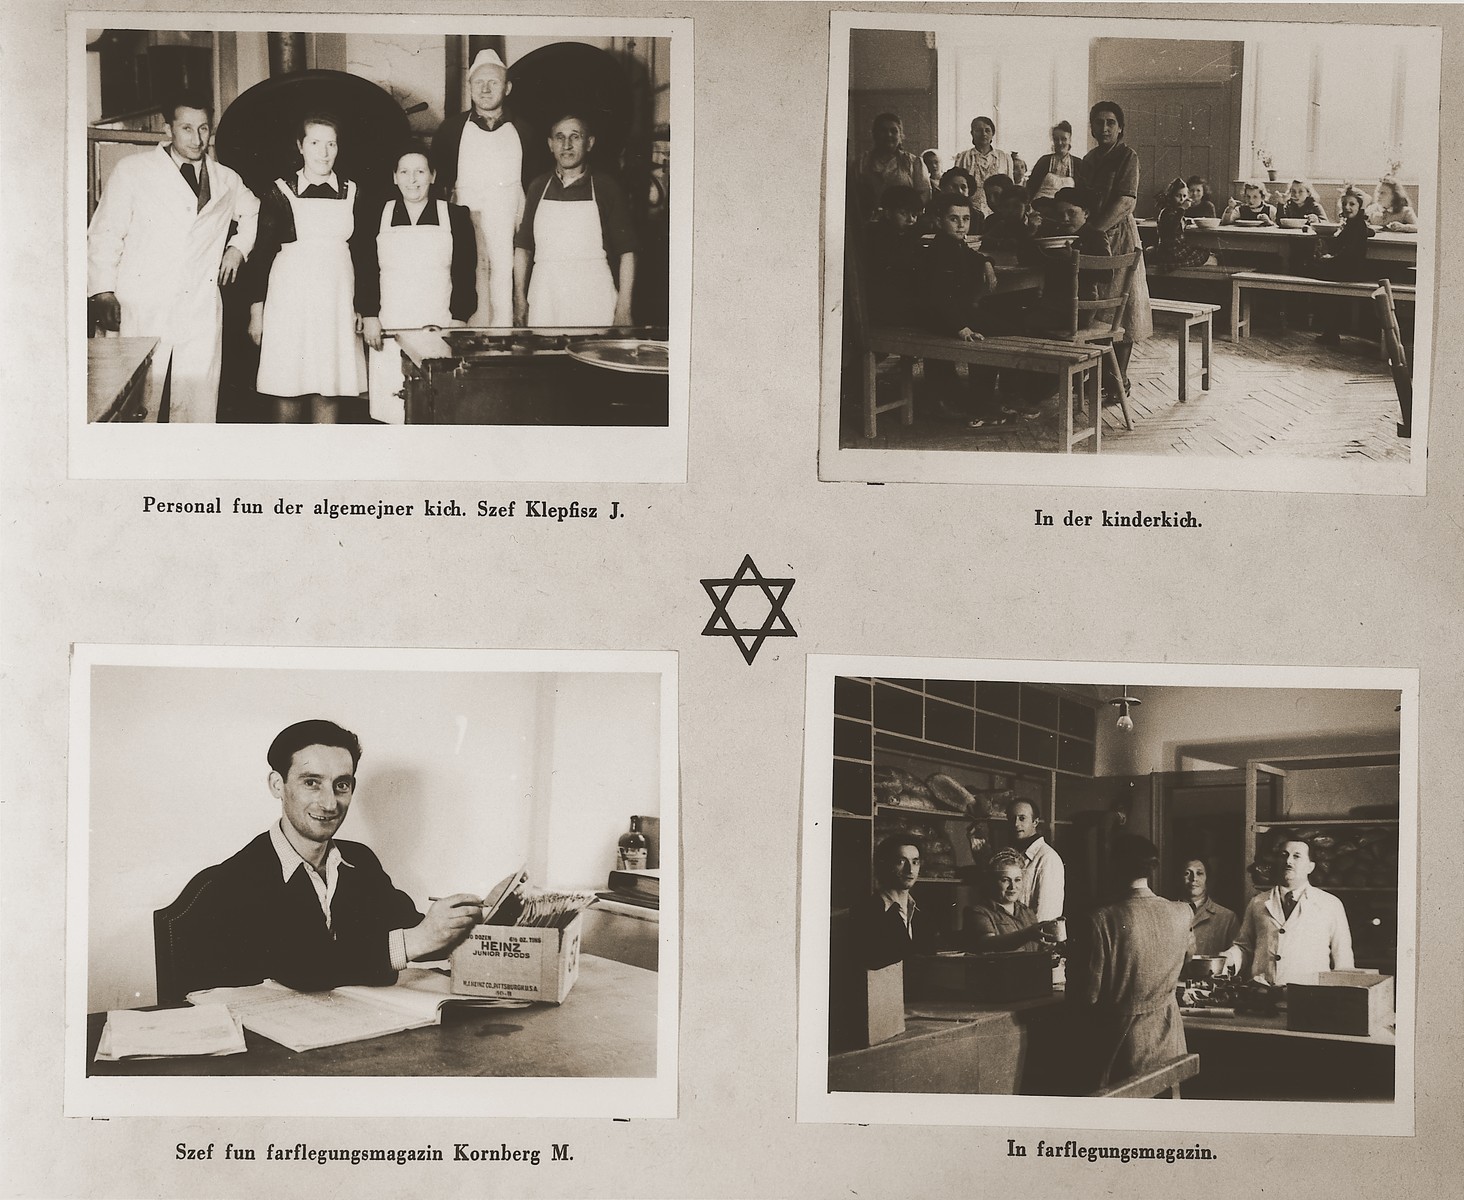 Four images of the Stuttgart DP camp kitchens and commissary.

Among those pictured are J. Klepfisz, Shamai (Sam) Greenberg, and Moses Kornberg.

One page from the Stuttgart Jewish DP camp album entitled, "Jidiszer D.P. Center UNRRA--P.C.IRO in Stuttgart," compiled and photographed by Alexander Fiedel and dedicated to Moses Kornberg, head of the commissary.